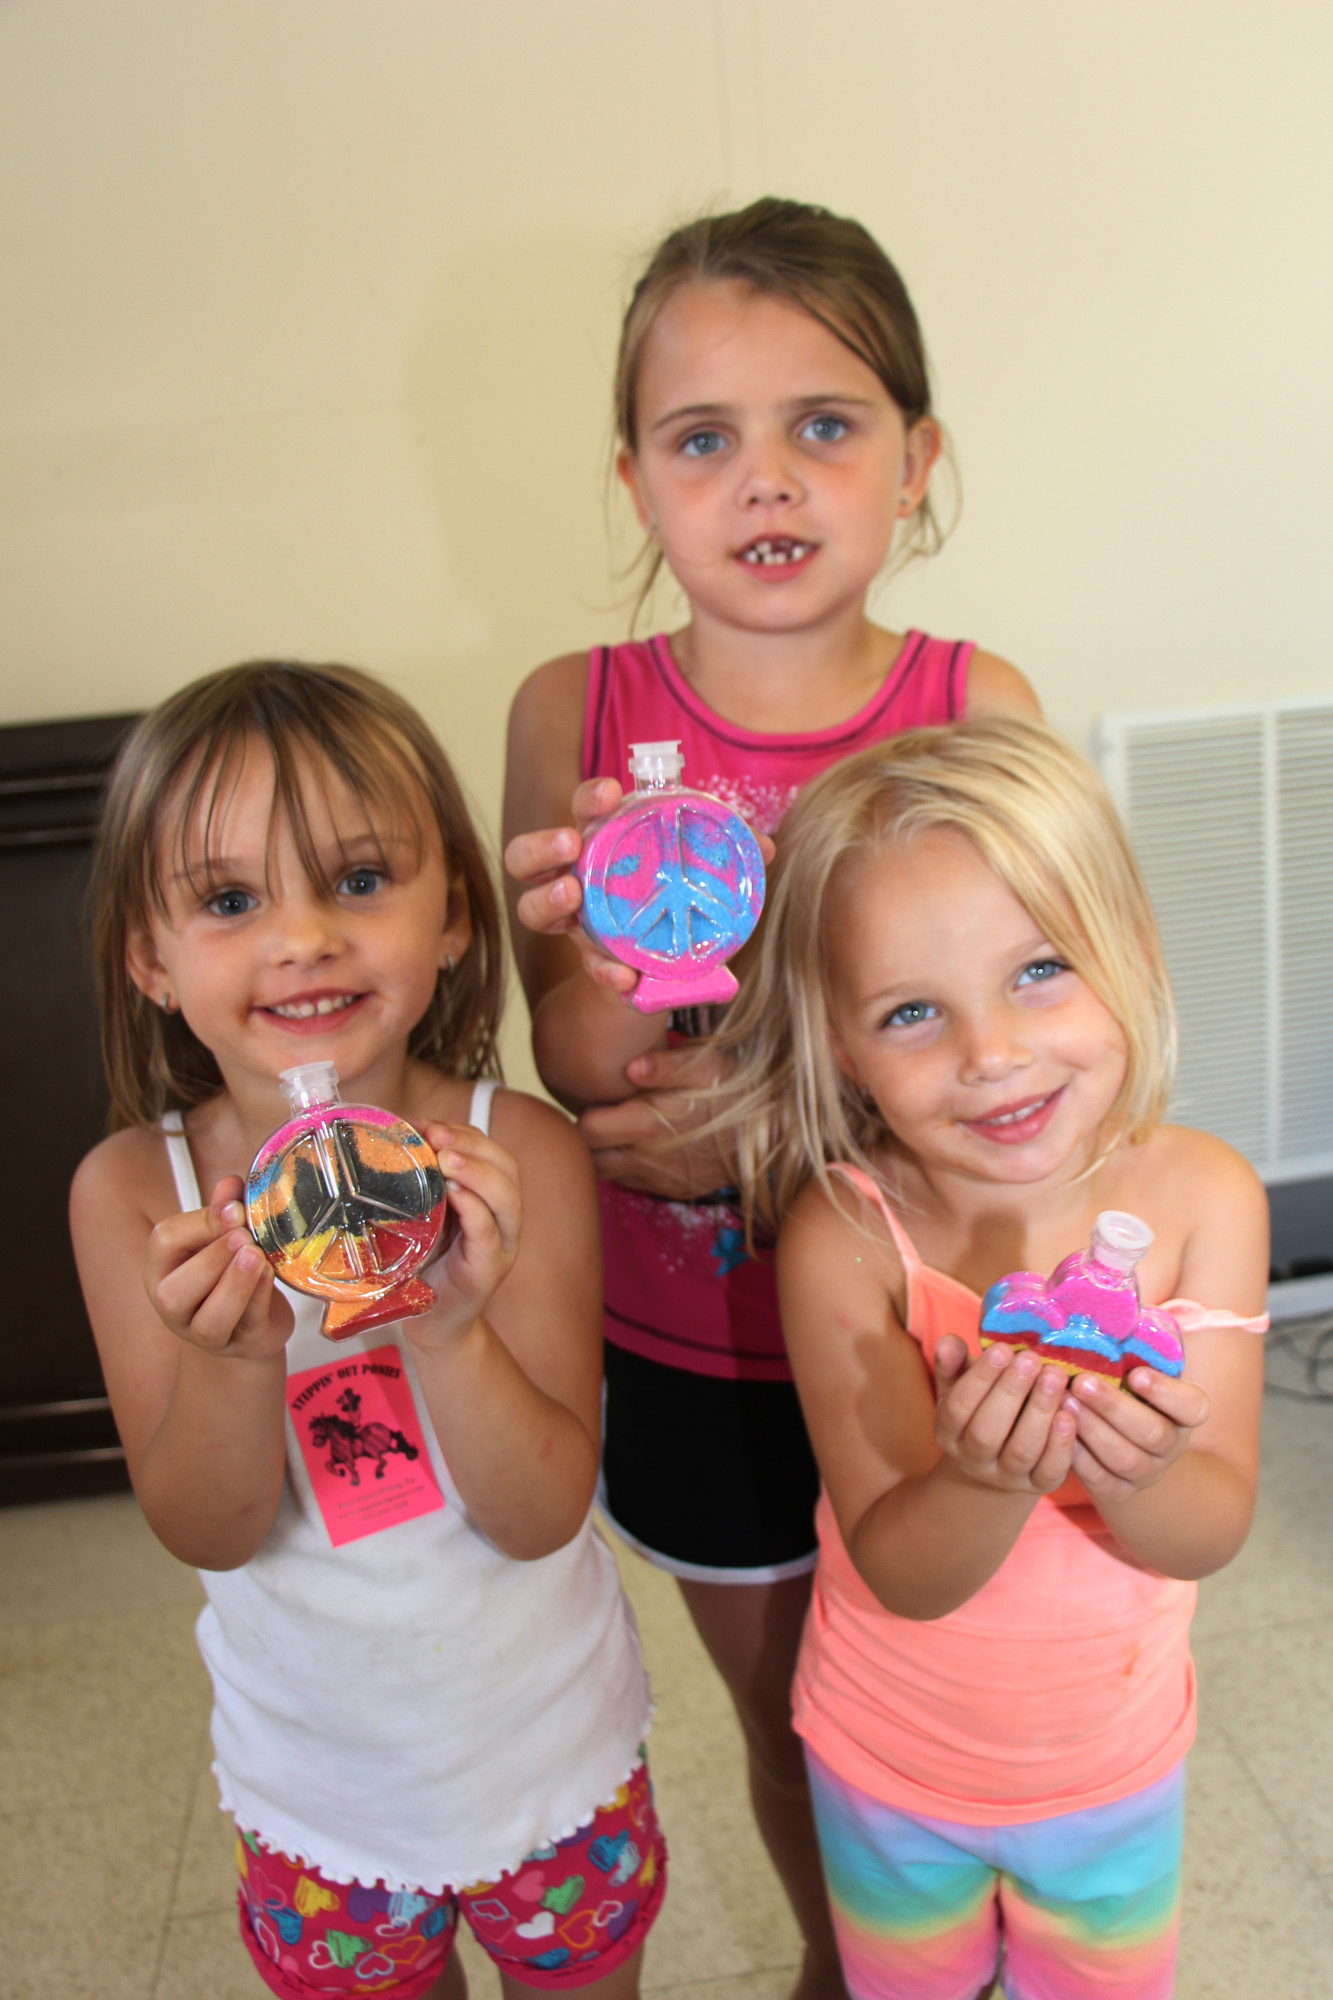 The Frantzen sisters had some fun making Sand art. Jaclyn, 3, left, Kylie, 3, right and Makayla, 6, showed off their work.